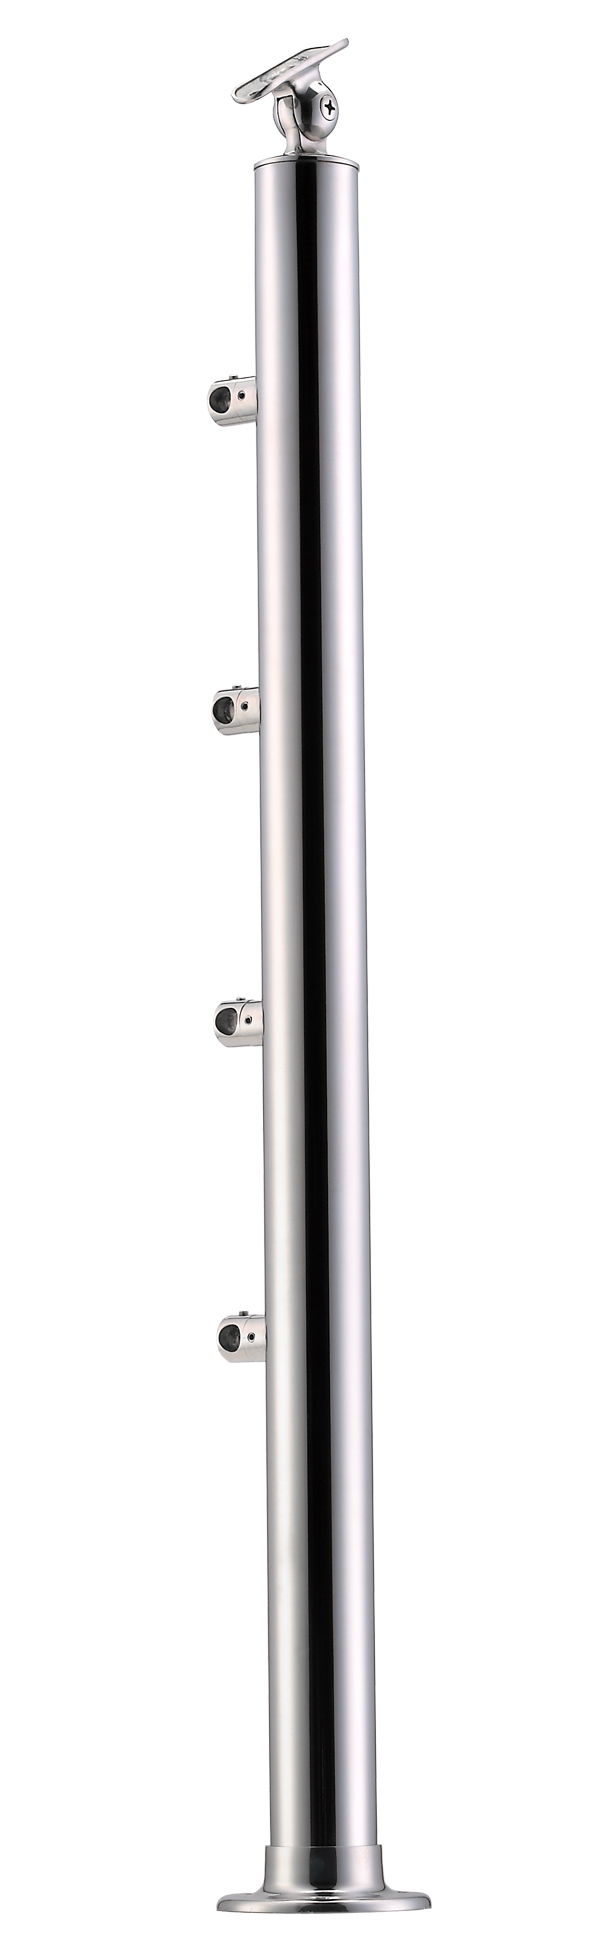 Stainless Steel Balustrade Posts - Tubular - SS:2020456A